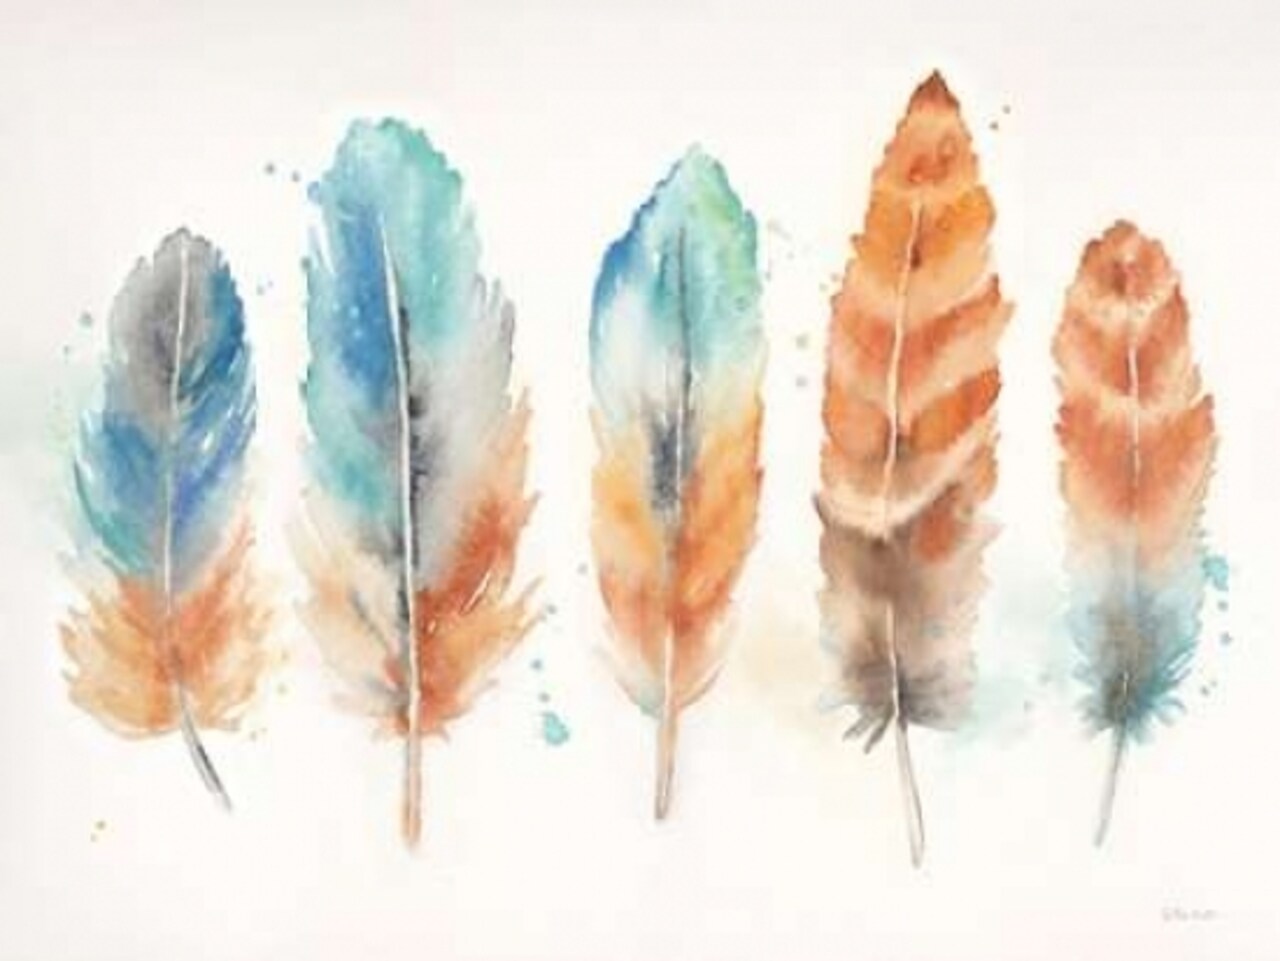 Watercolor Feathers Landscape Poster Print by  Cynthia Coulter - Item # VARPDXRB10762CC